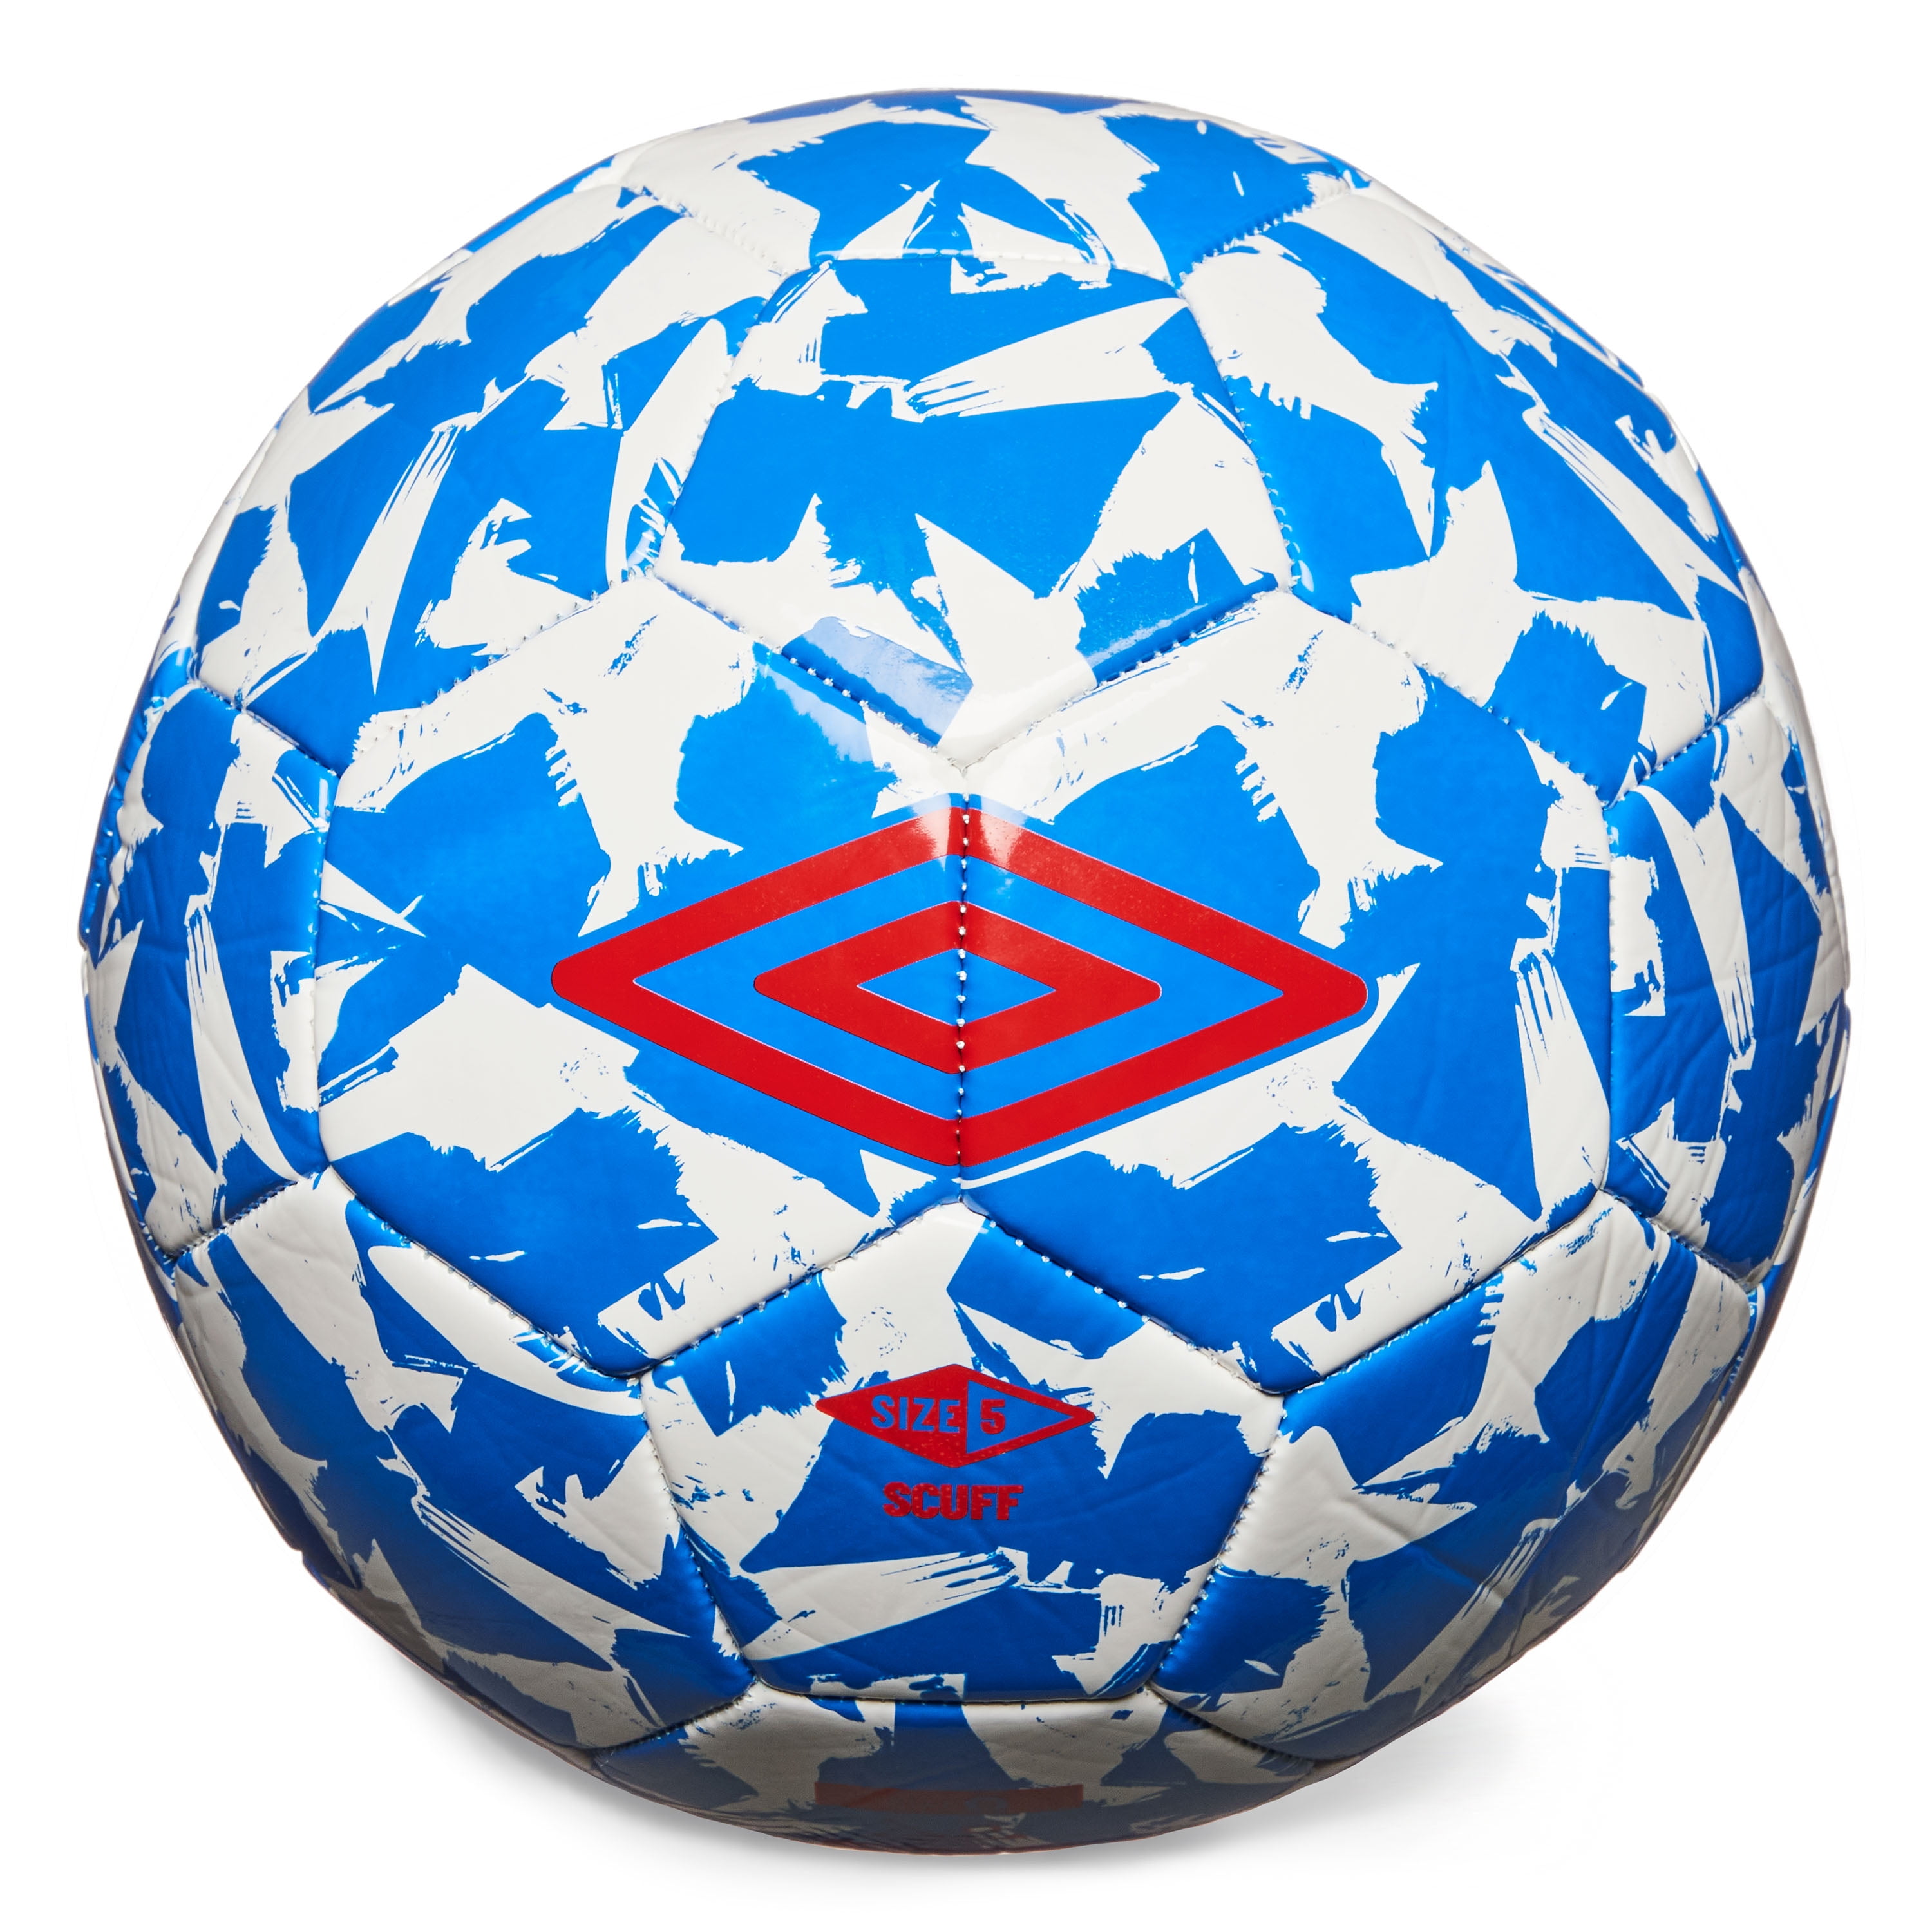 HONDURAS Authentic Official Licensed Soccer Ball size 5 White and blue design  